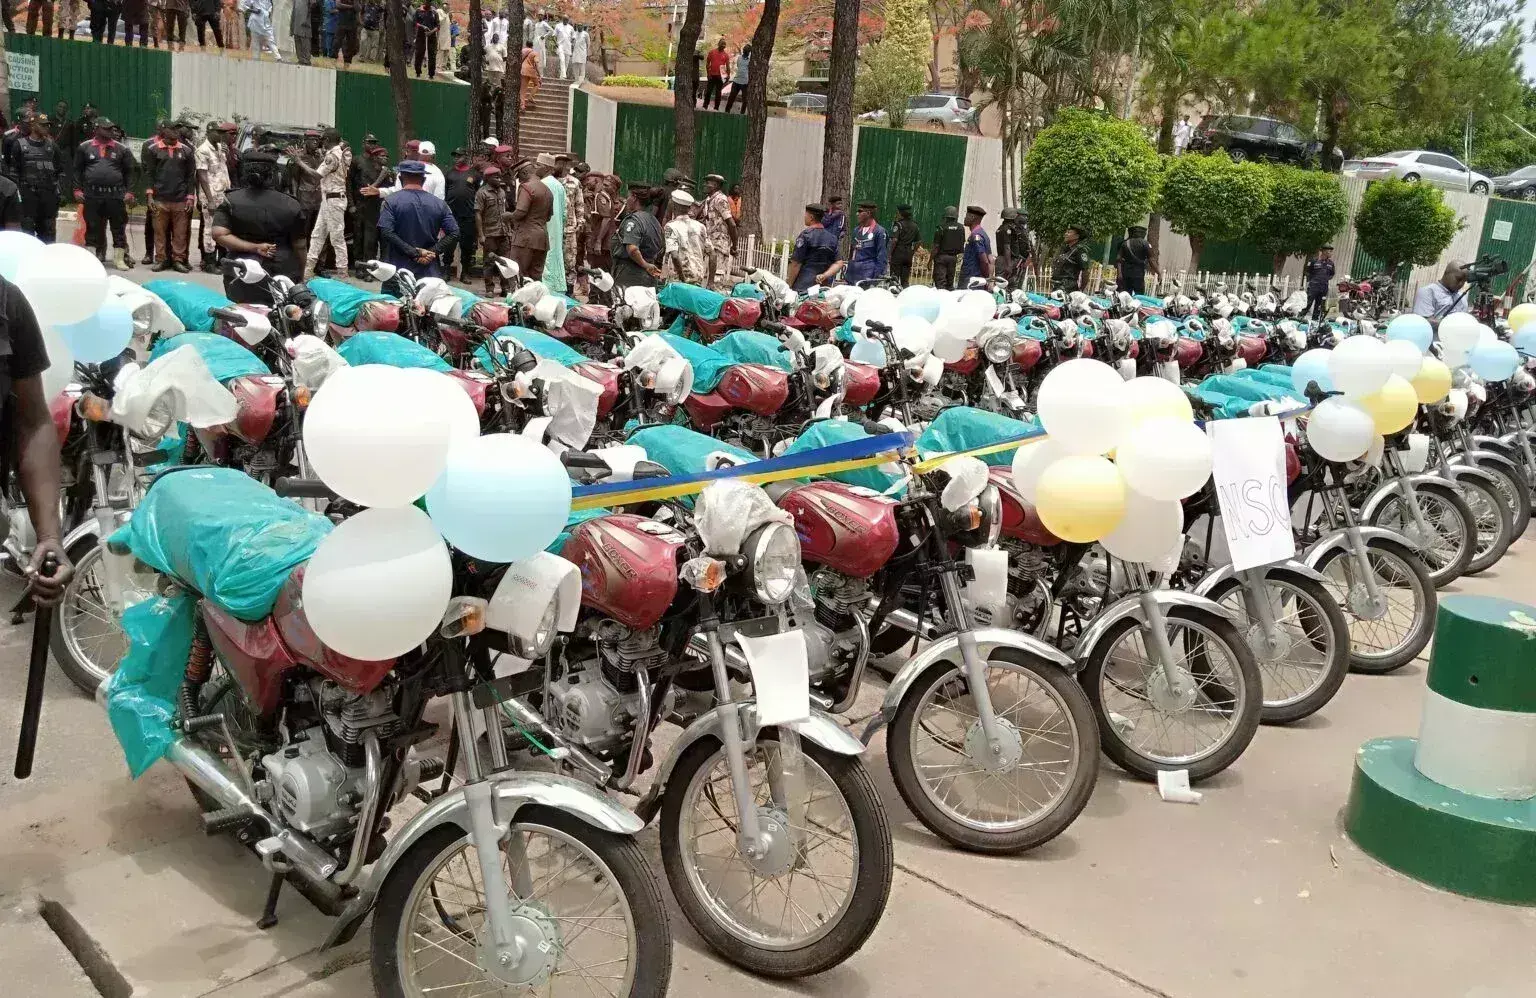 Wike donates motorcycles to combat crime in hard-to-reach areas